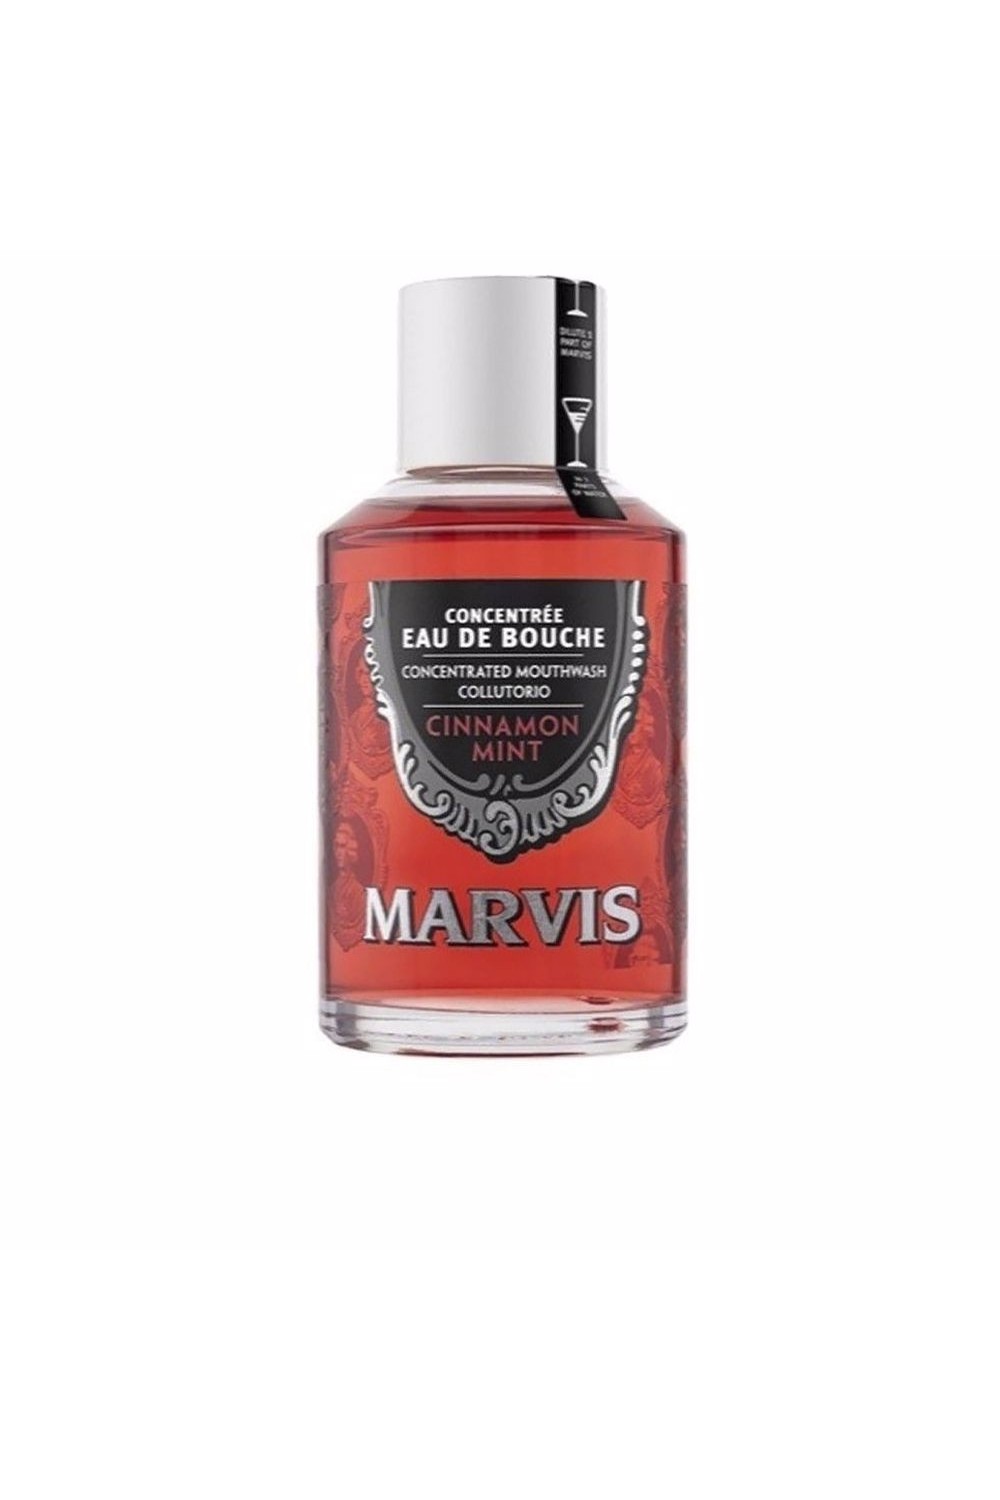 Marvis Cinnamon Mint Concentrated Mouthwash Collutorio 120ml